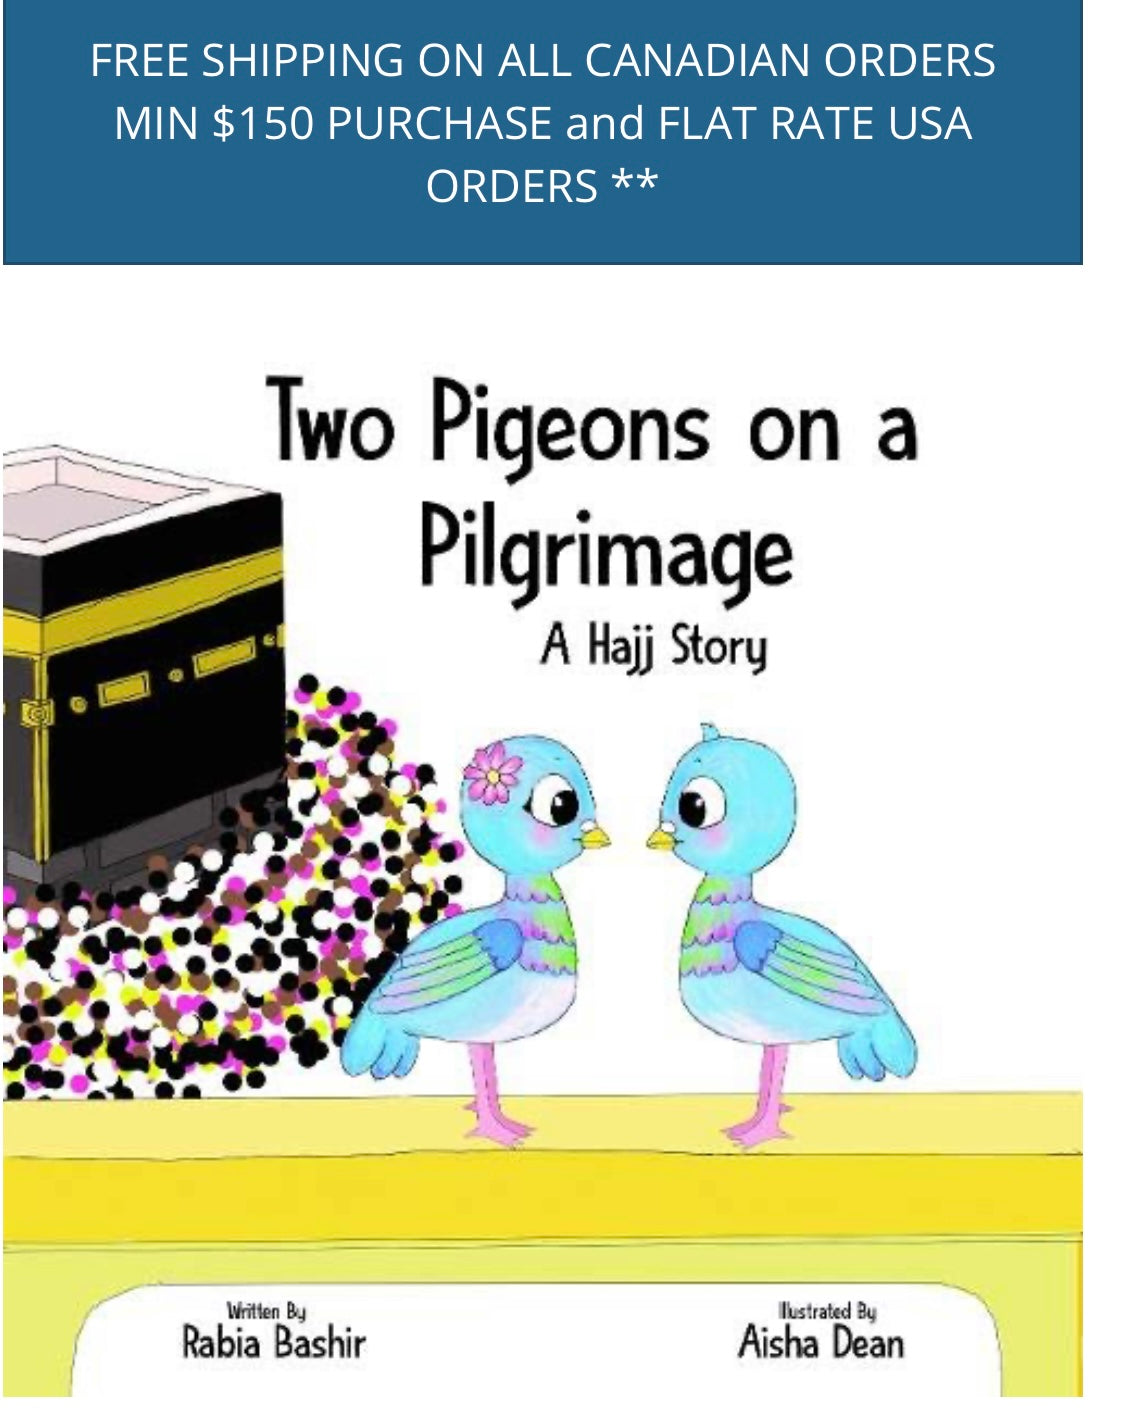 Two Pigeons on a Pilgramage